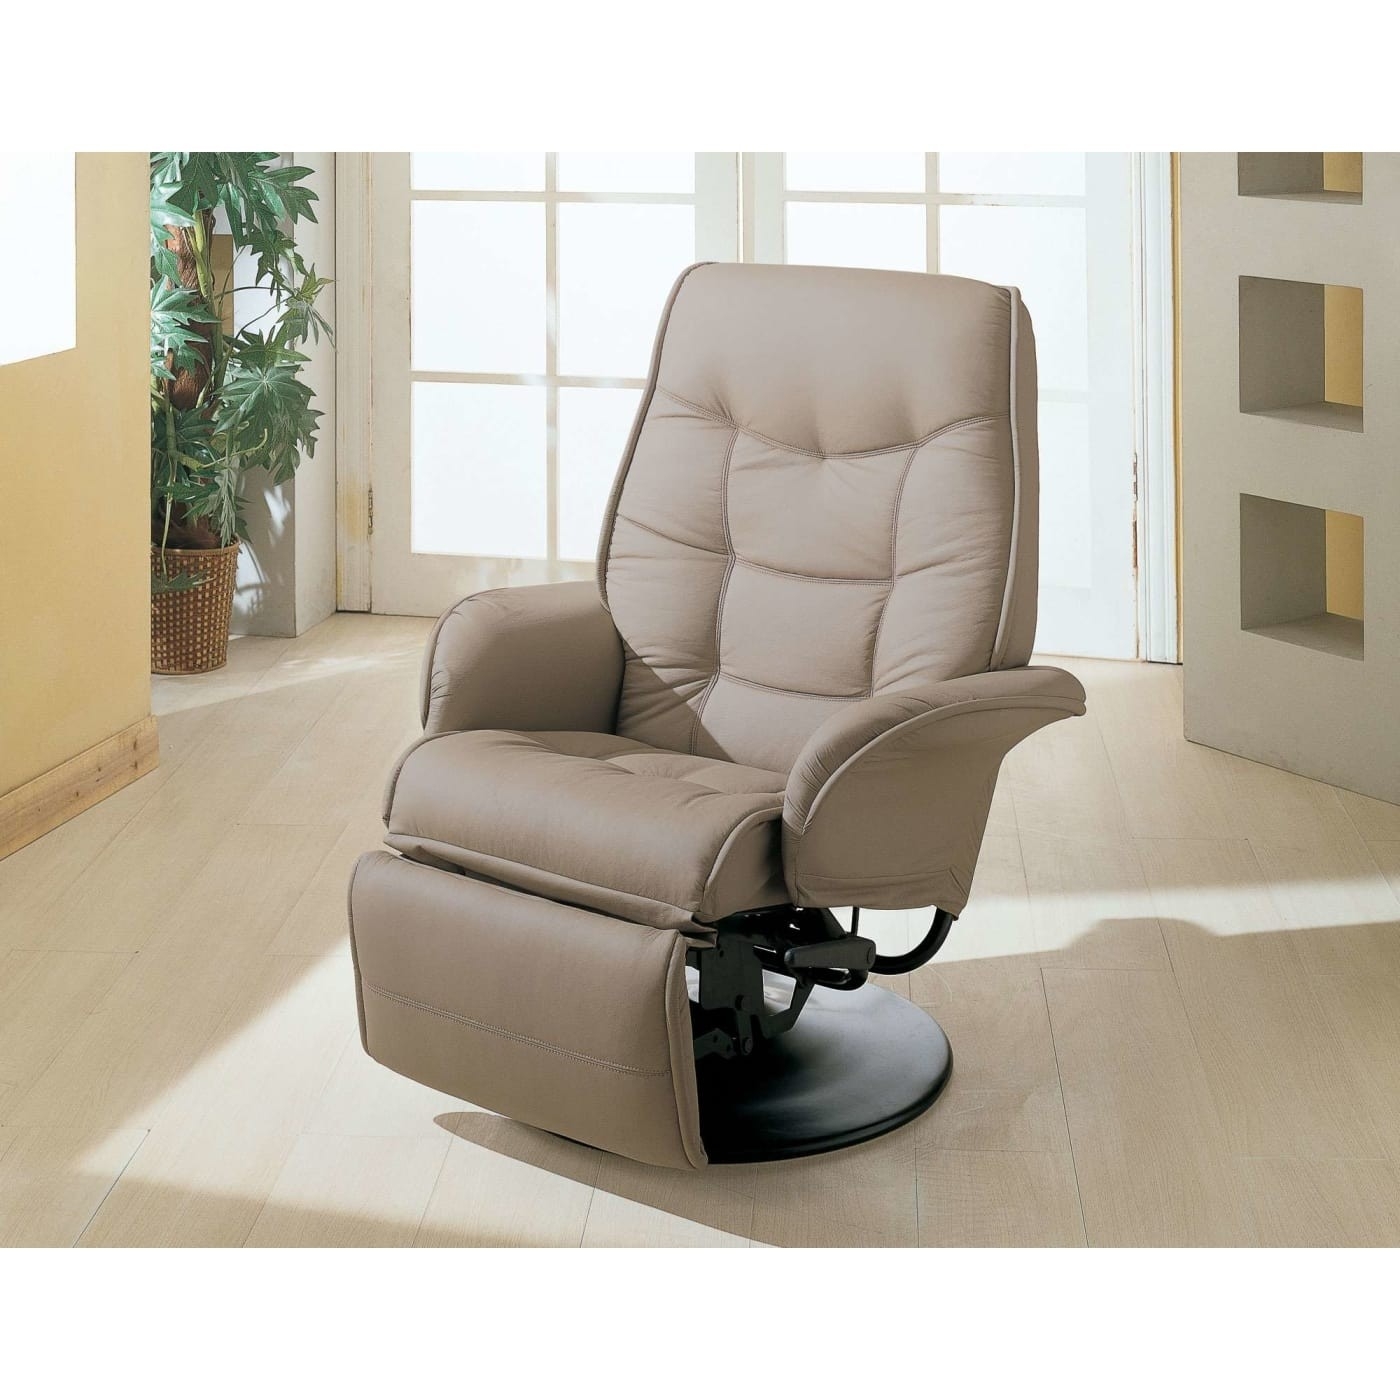 Recliner Chairs For Small Apartments